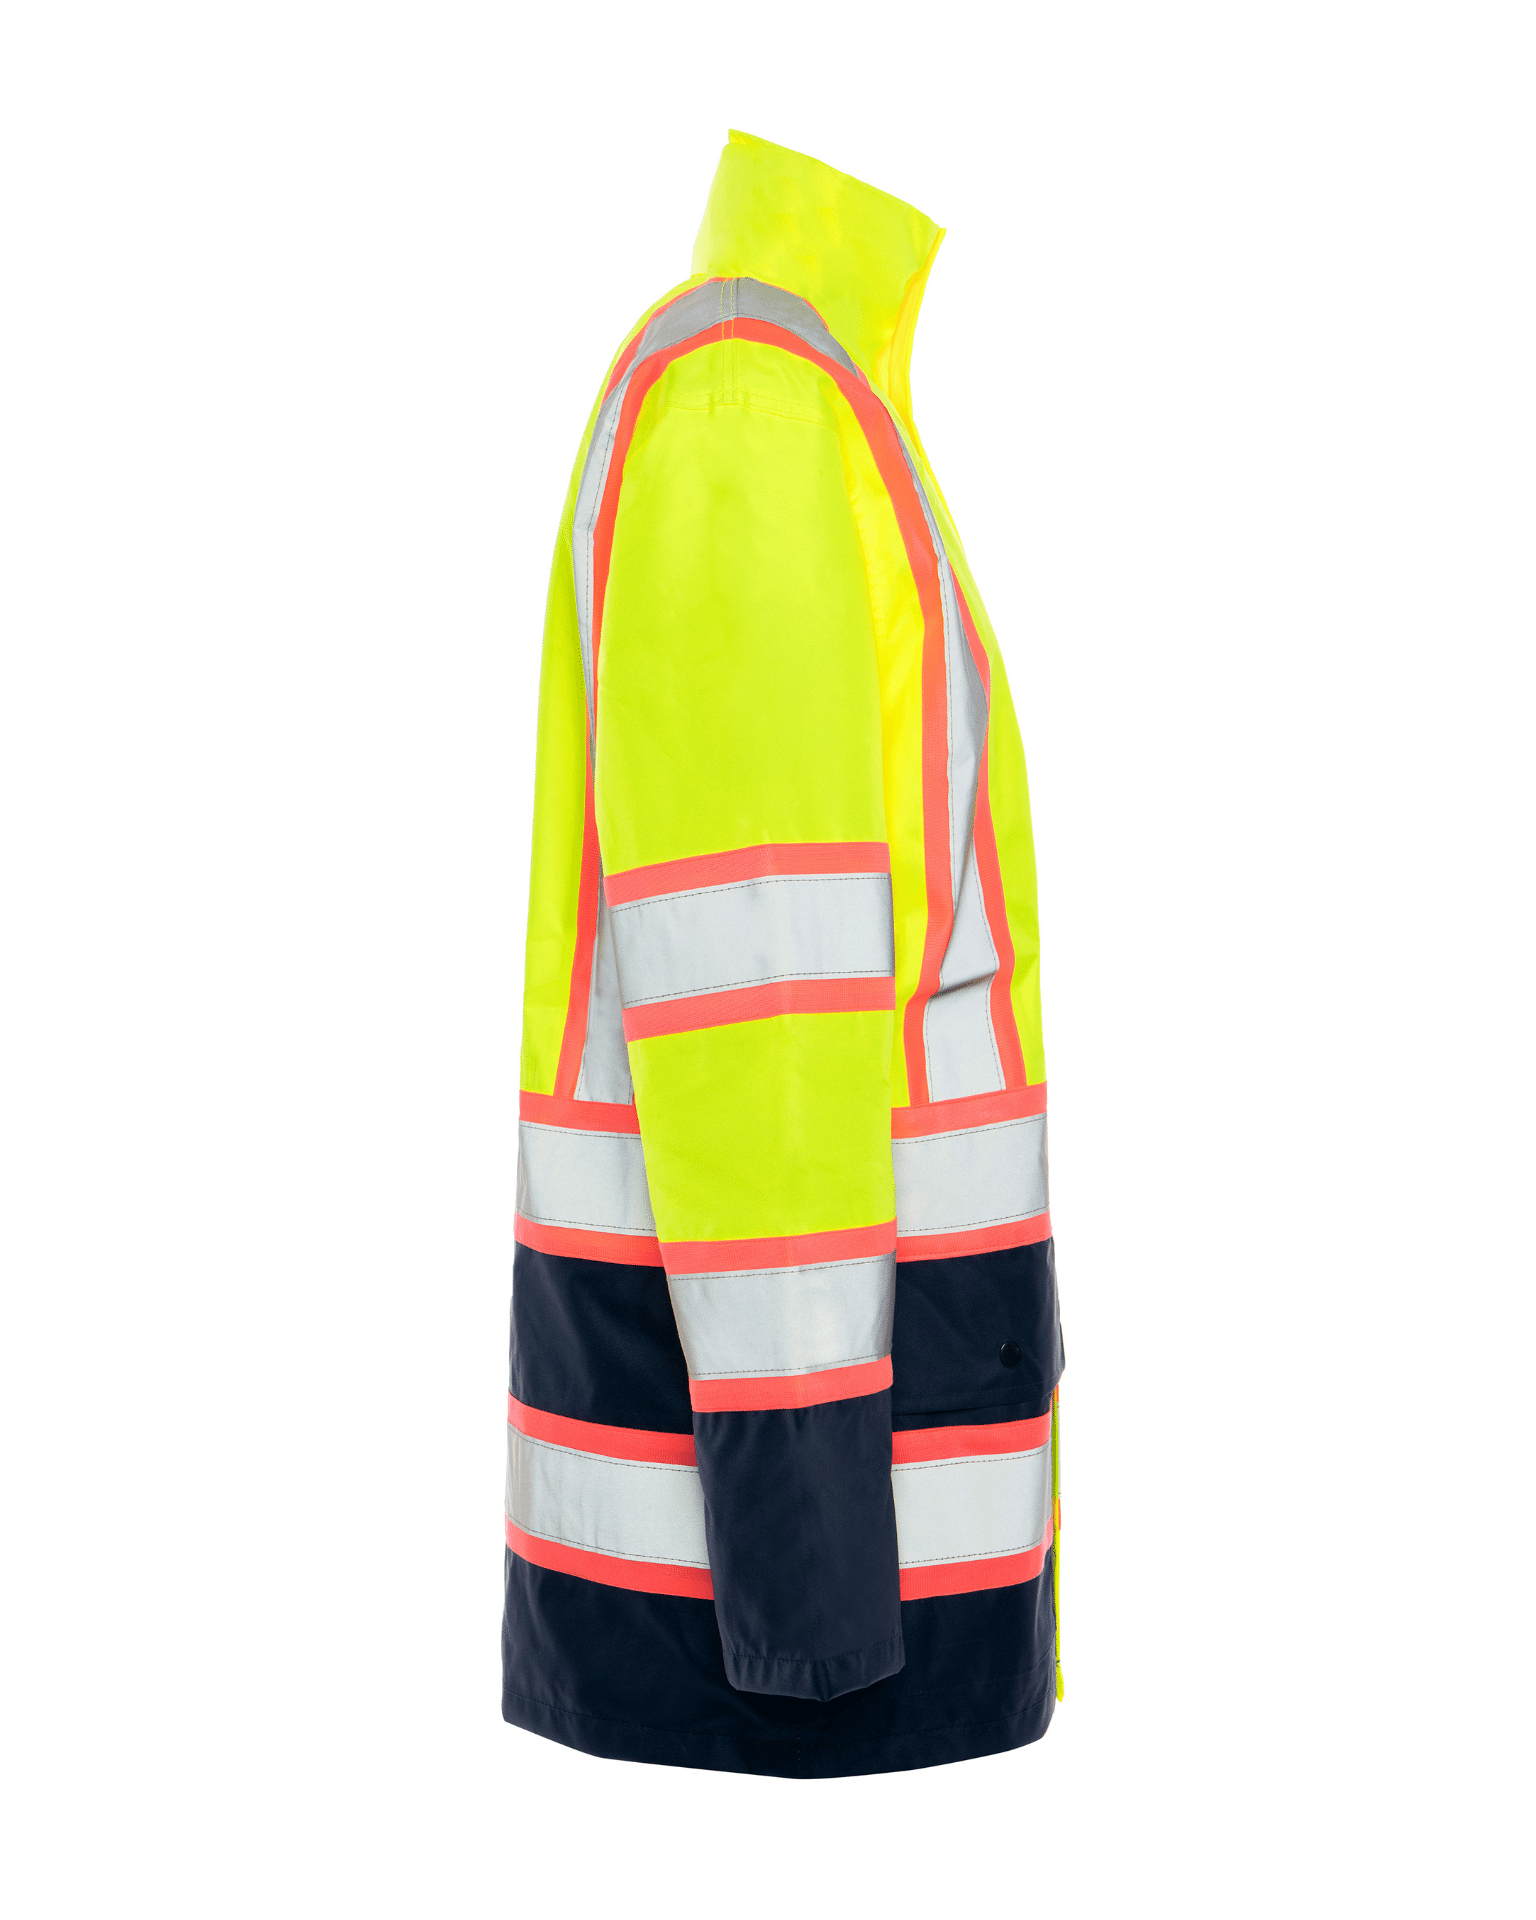 ANSI Class 2 High Visibility Women's pink trimmed reflective tape polyester shell with mesh lining rain jacket by Utility Pro